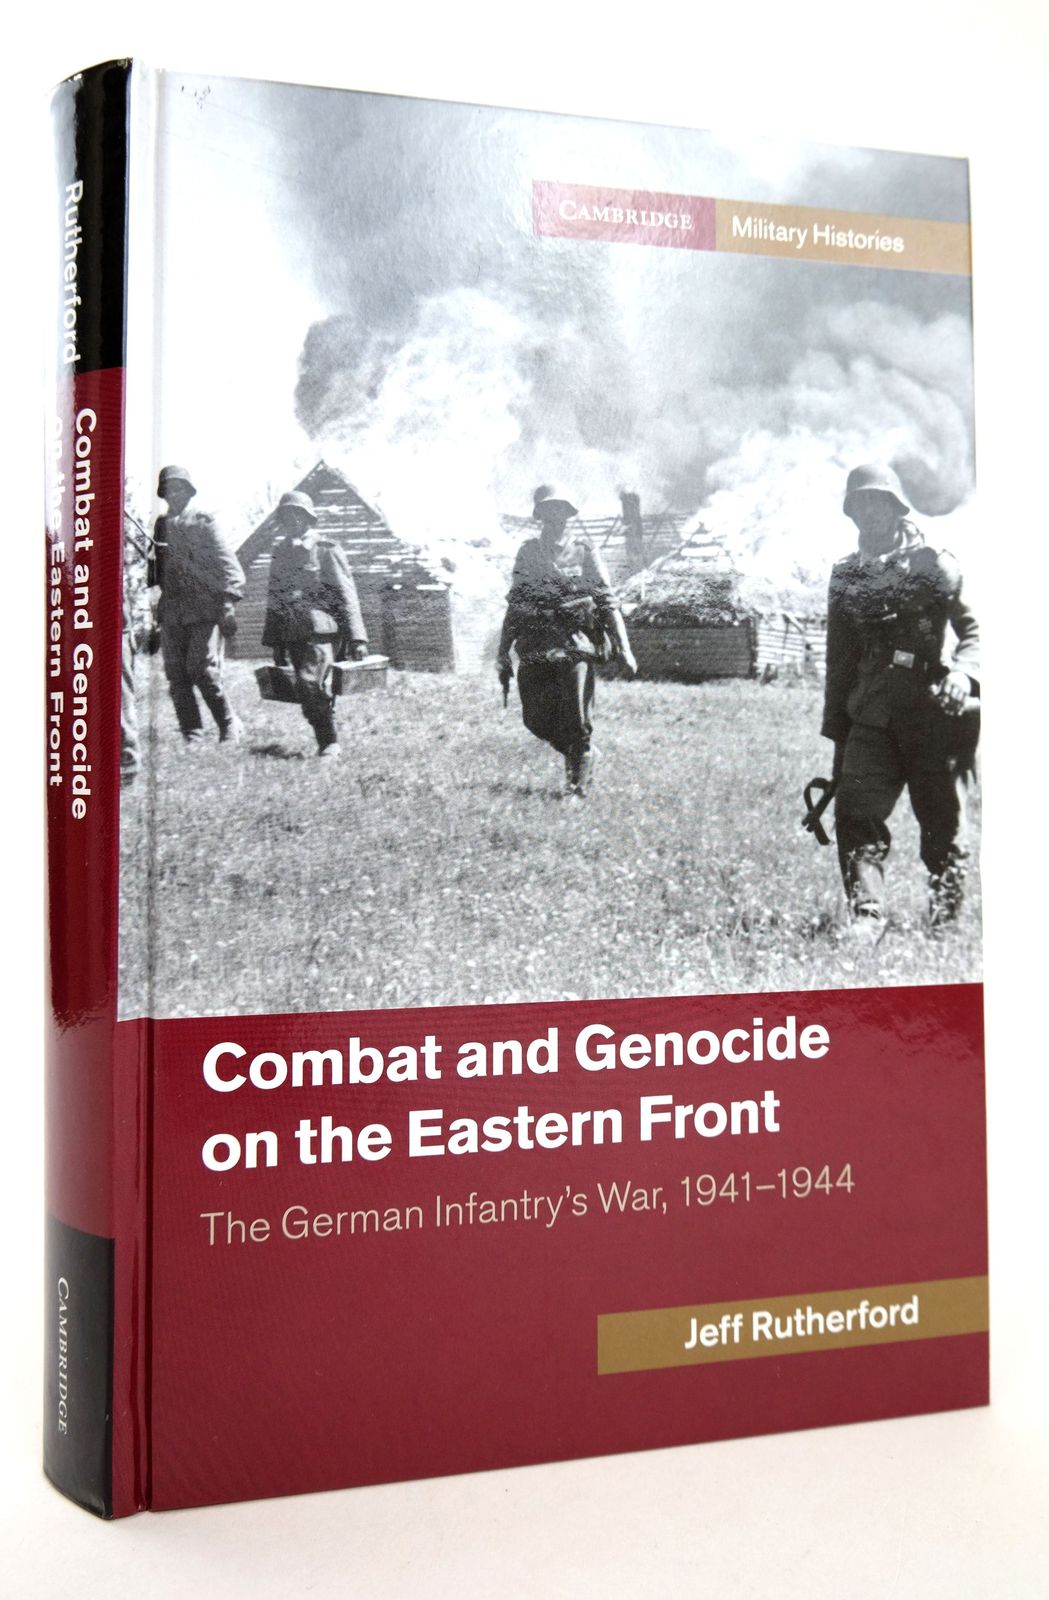 Photo of COMBAT AND GENOCIDE ON THE EASTERN FRONT: THE GERMAN INFANTRY'S WAR, 1941-1944 written by Rutherford, Jeff published by Cambridge University Press (STOCK CODE: 1818902)  for sale by Stella & Rose's Books